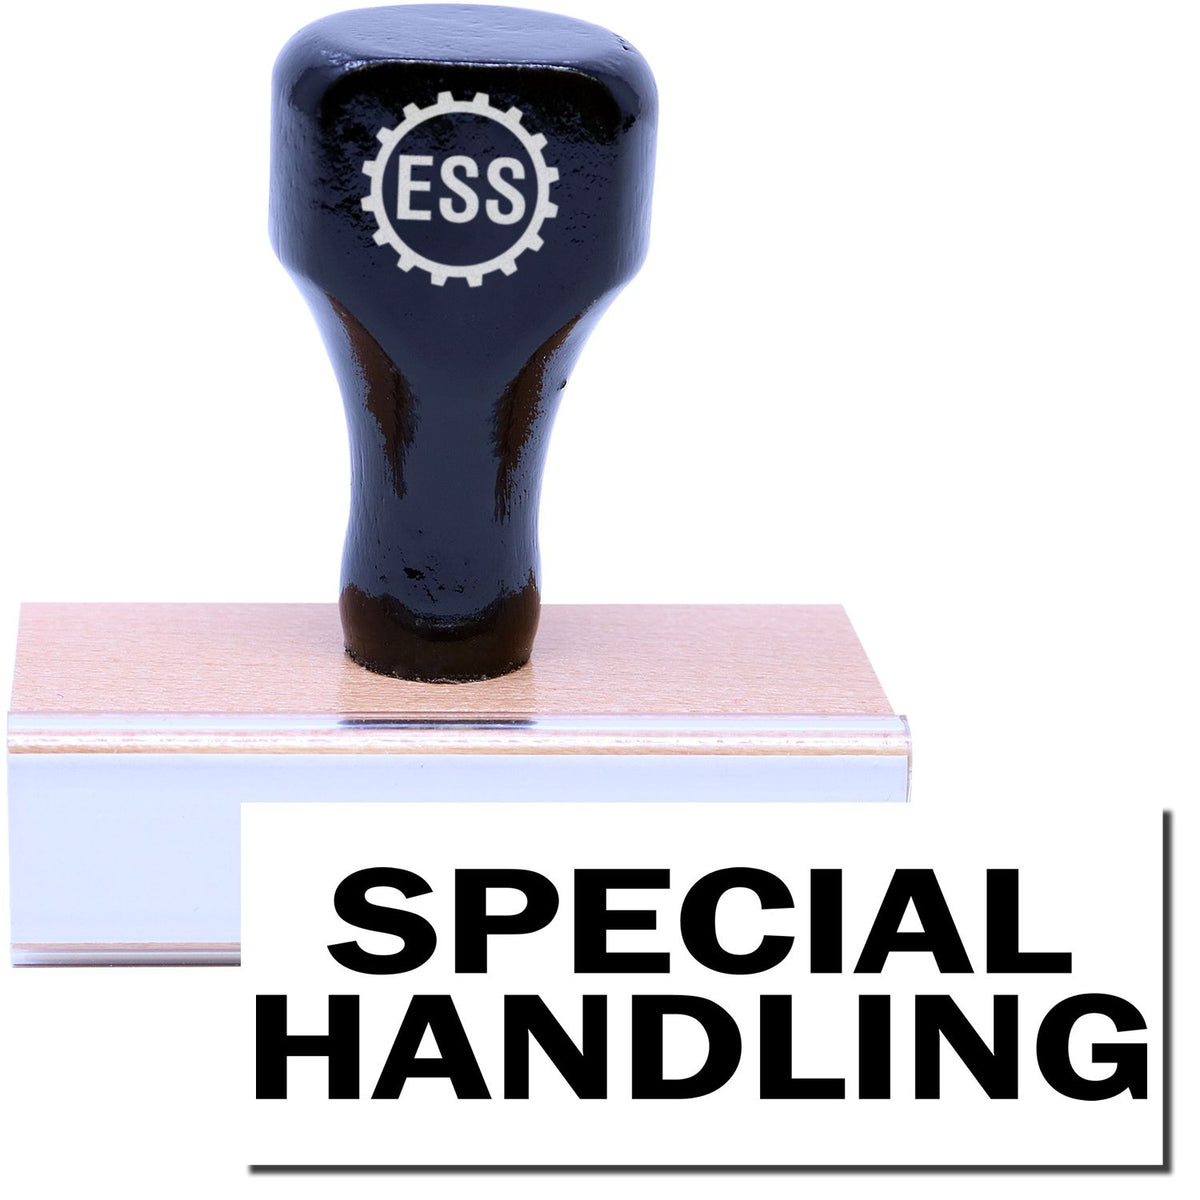 A stock office rubber stamp with a stamped image showing how the text &quot;SPECIAL HANDLING&quot; in a large font is displayed after stamping.